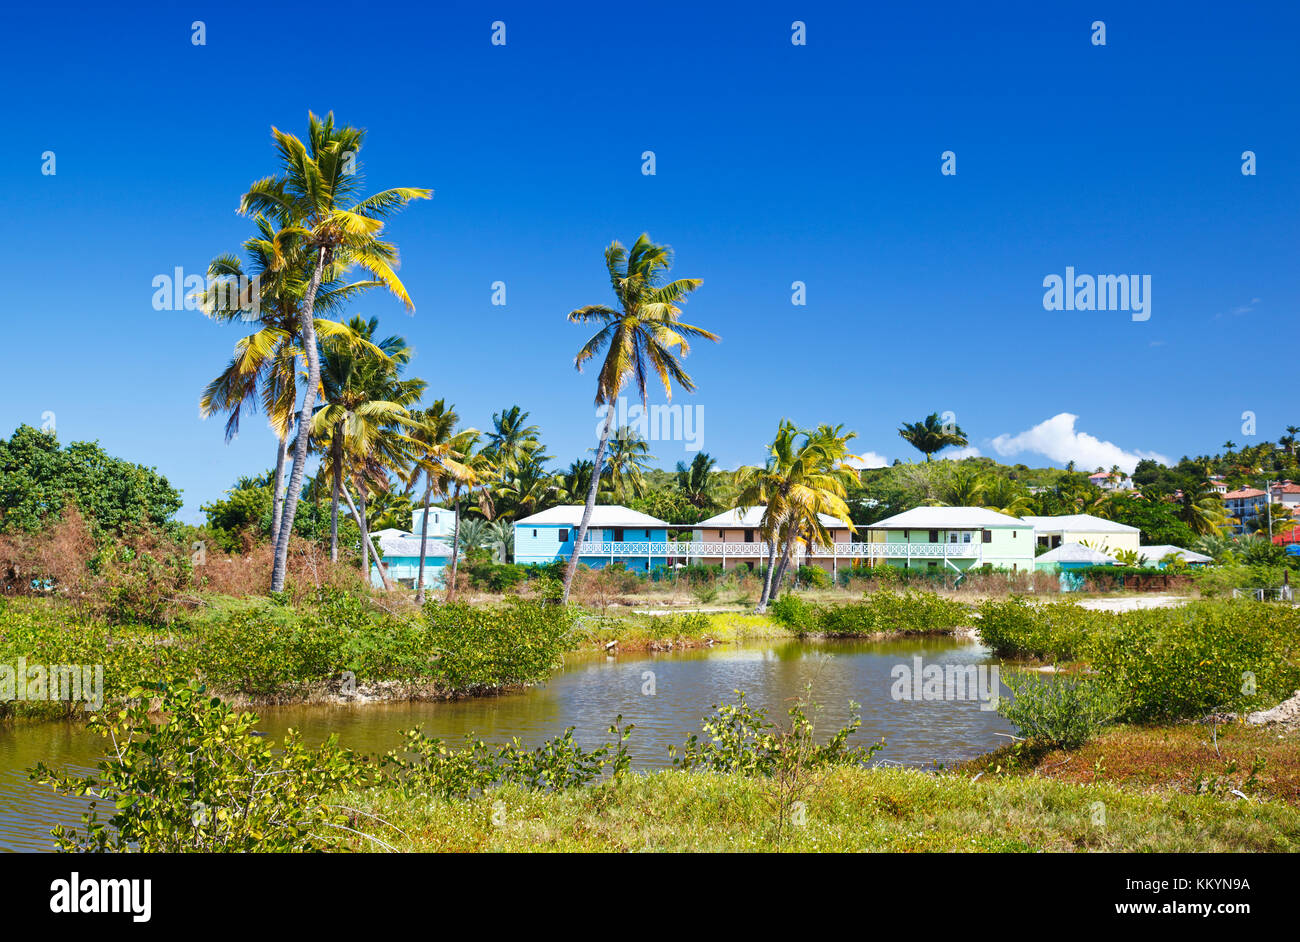 A caribbean hotel with tall coconut palm trees and deep blue sky. Stock Photo